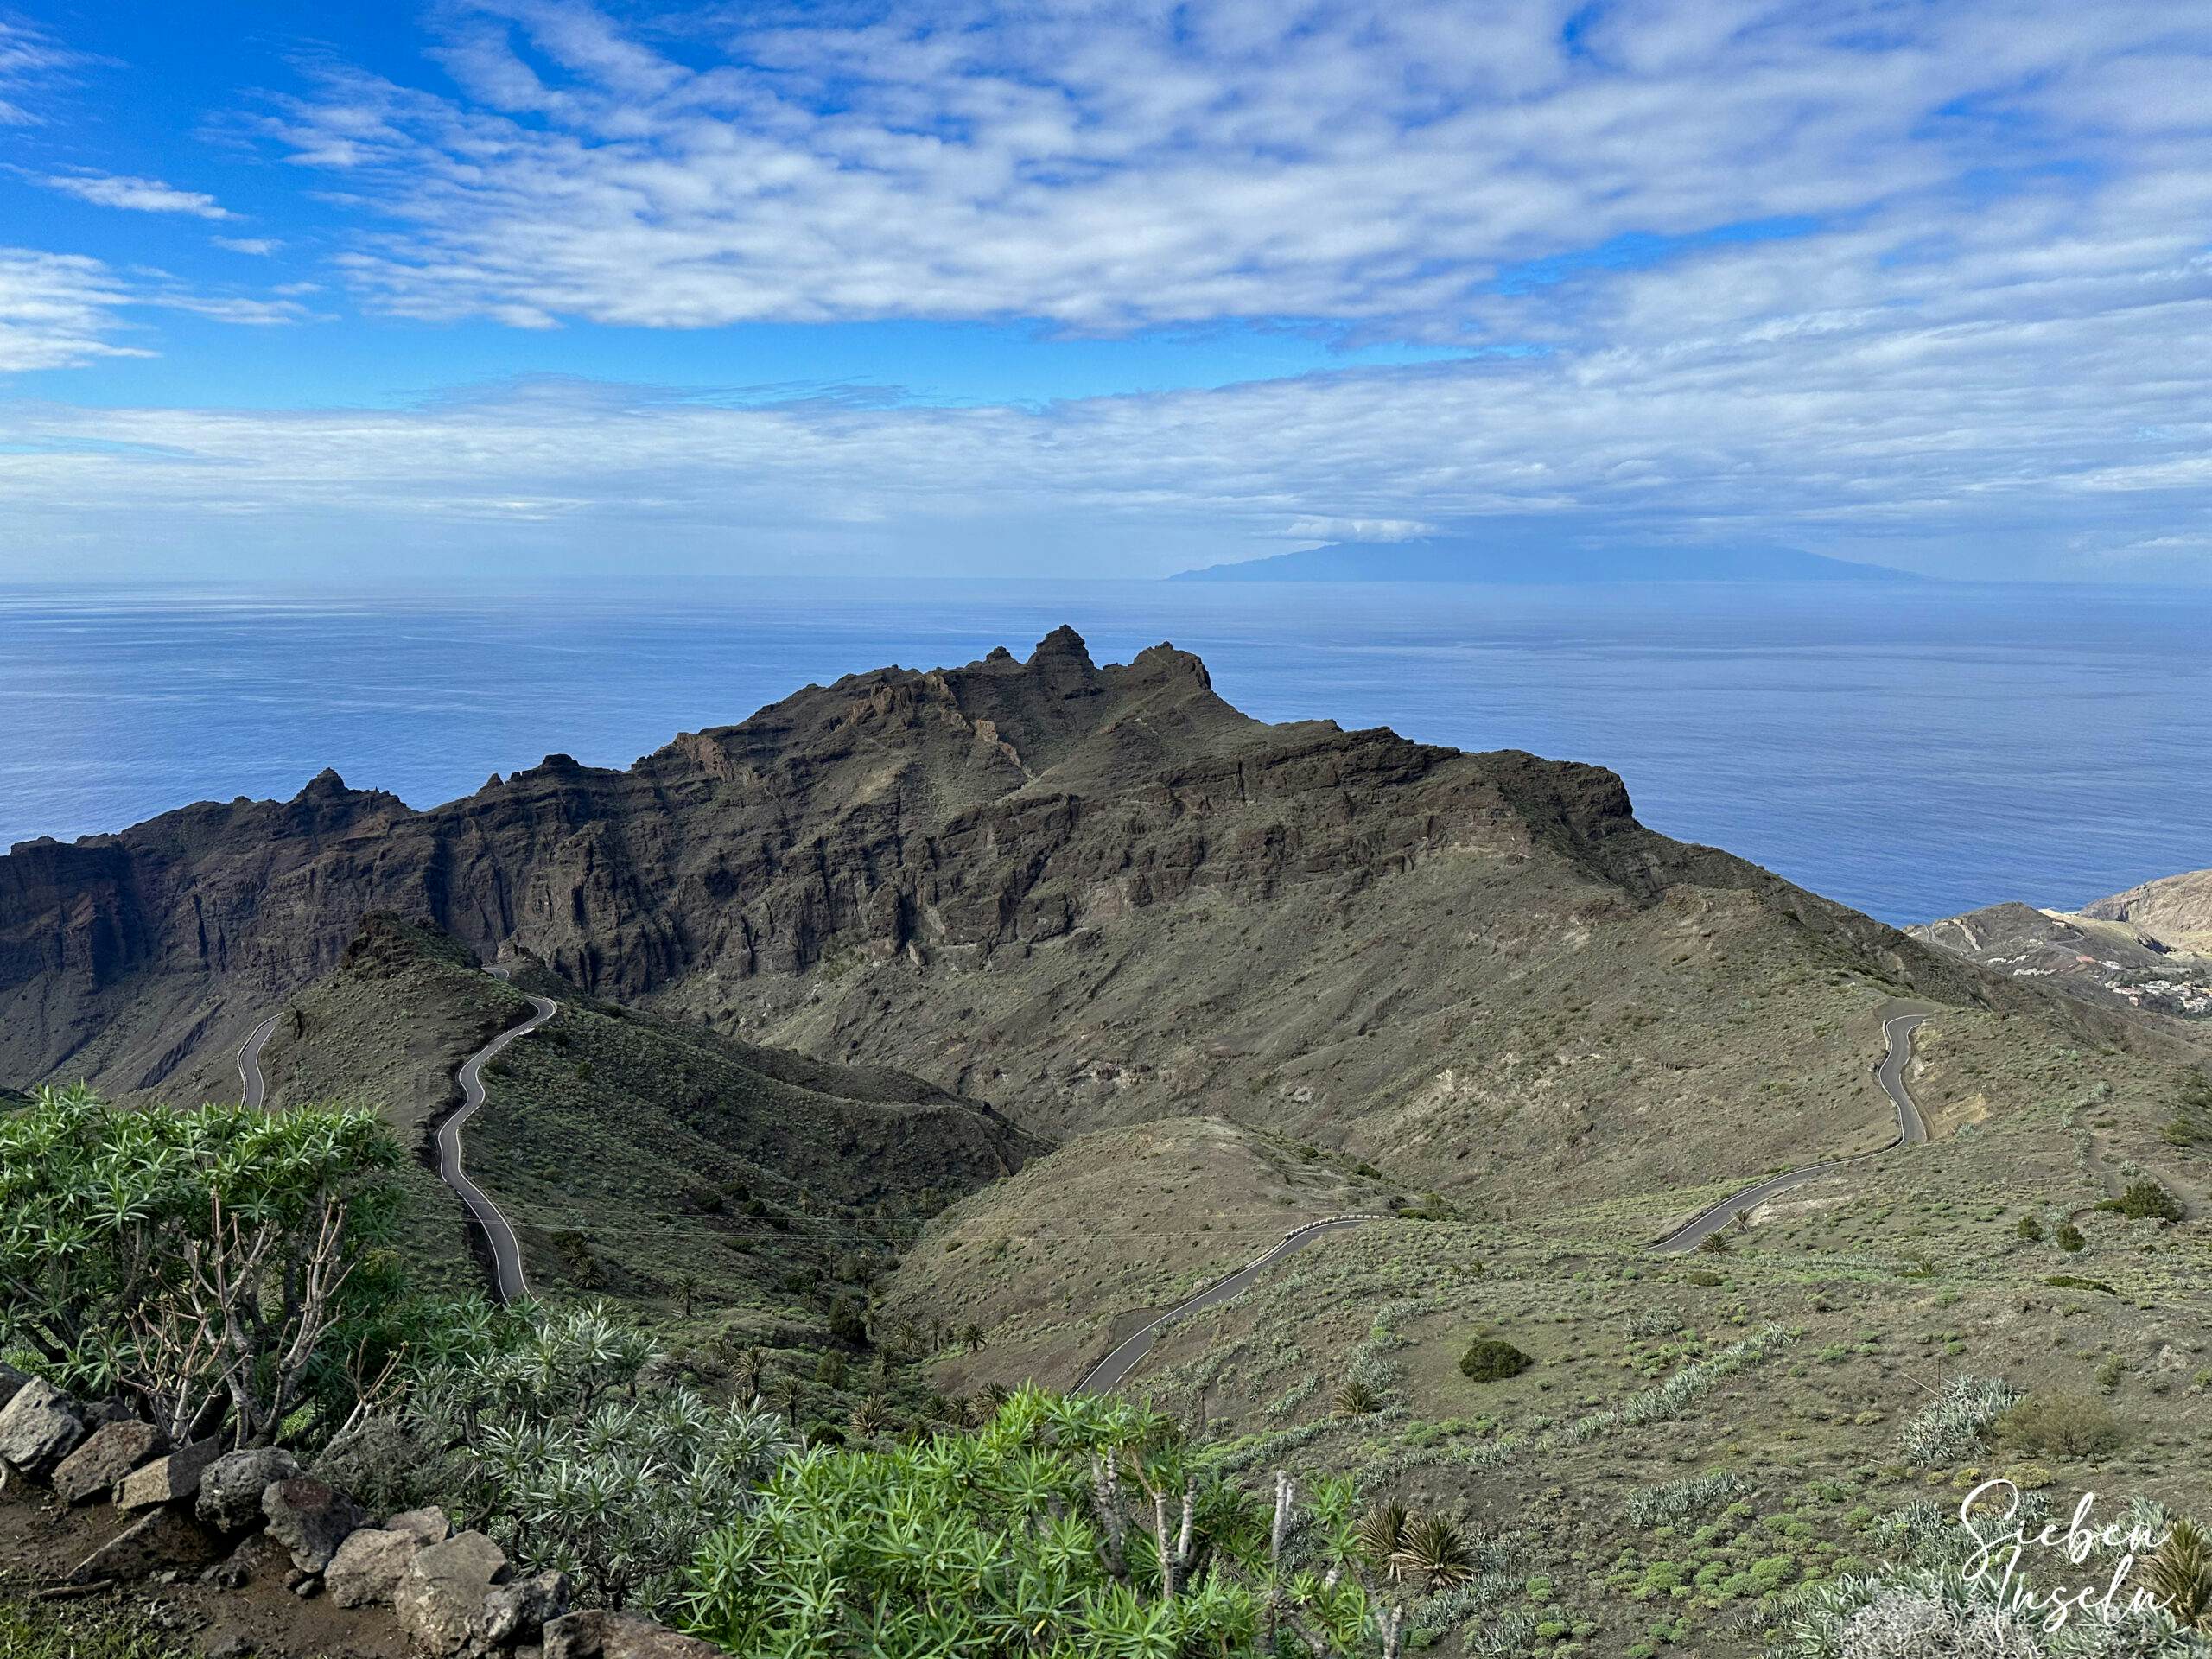 View from the ascent path via Alojera to the neighbouring island of El Hierro